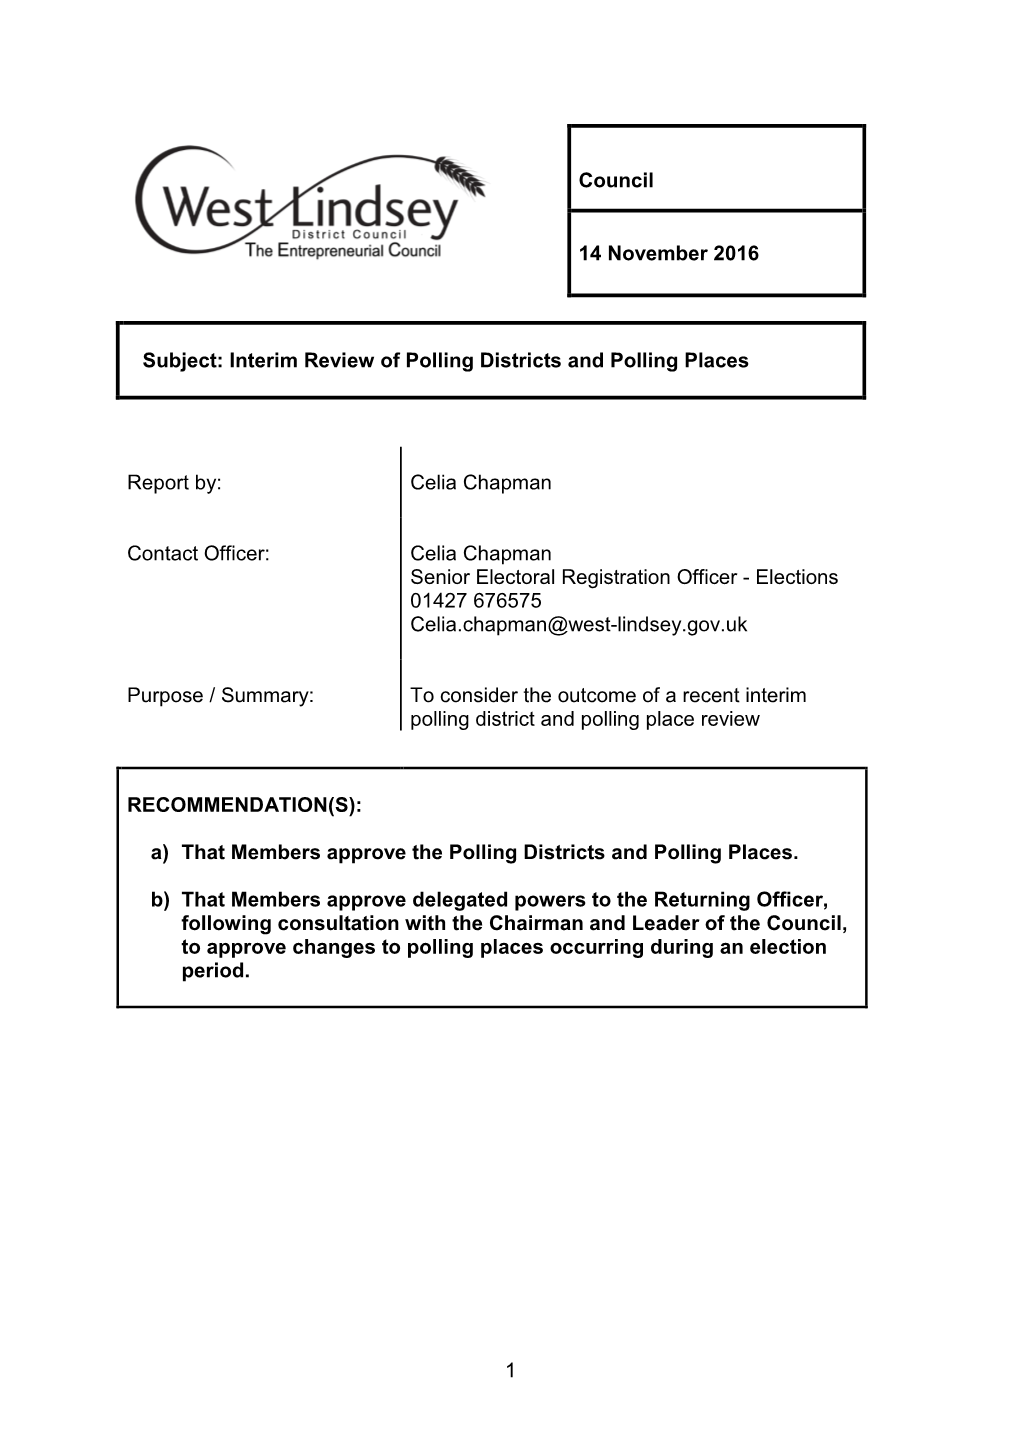 Interim Review of Polling Districts and Polling Places Report By